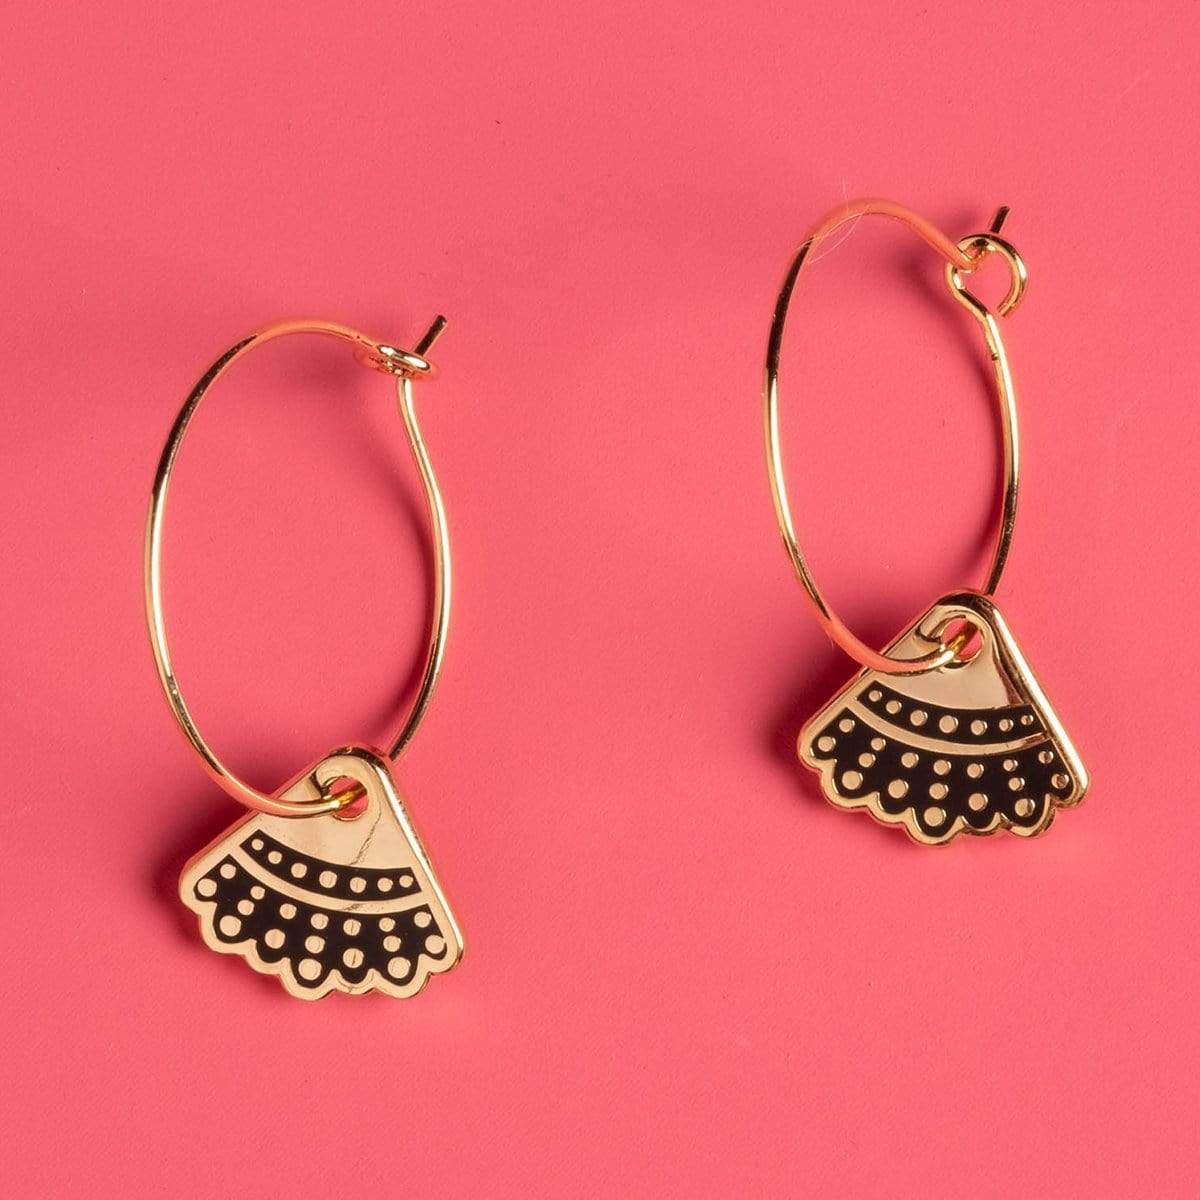 Dissent Collar Hoop and Charm Earrings